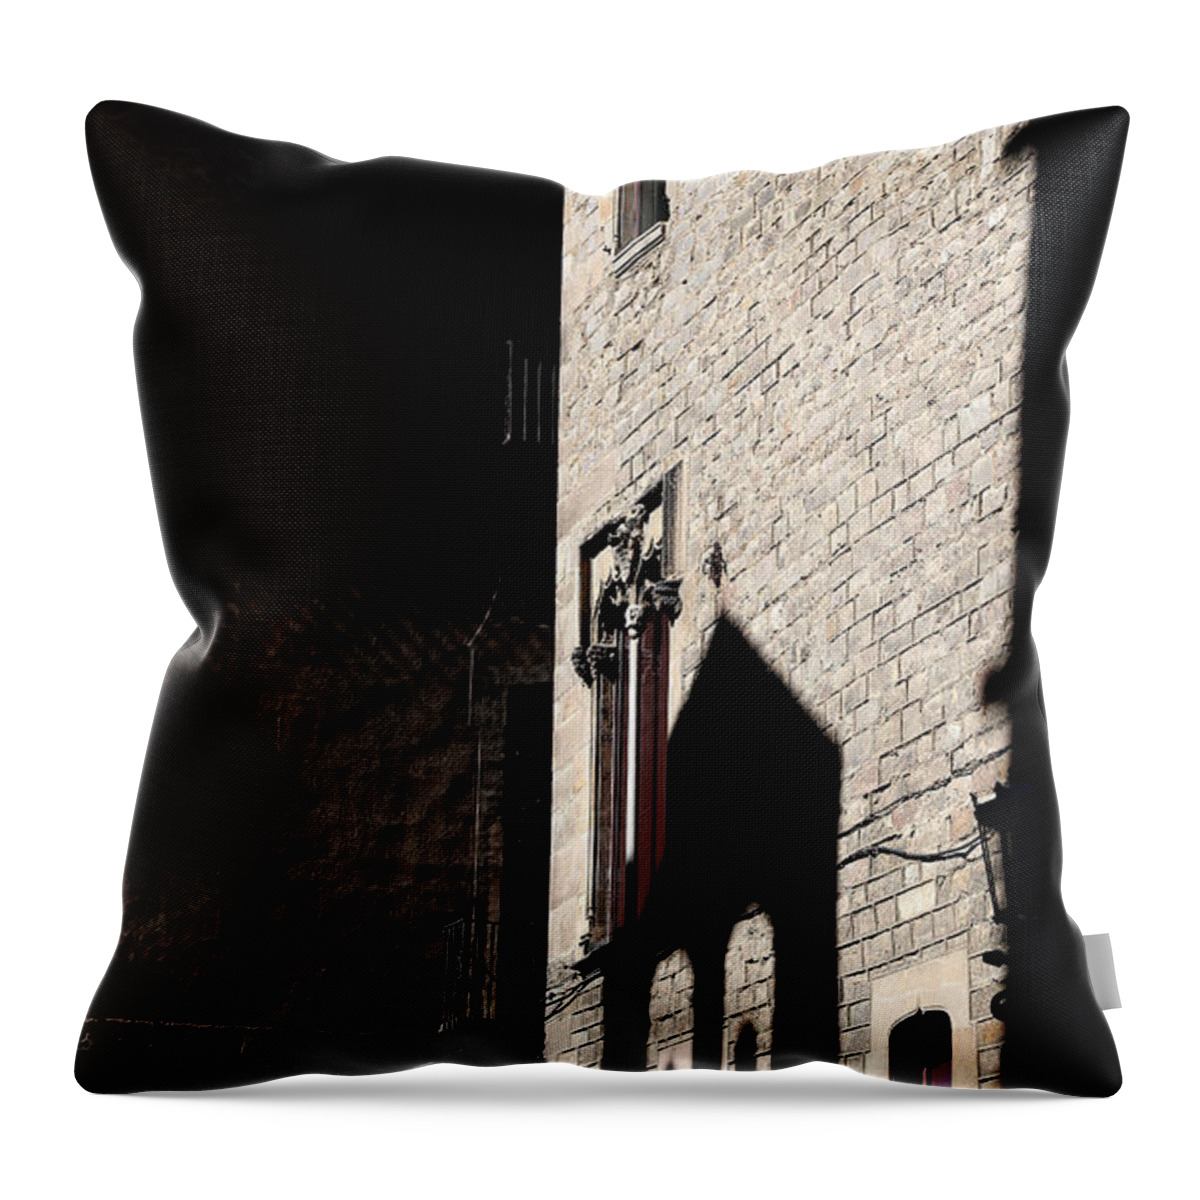 Barcelona Throw Pillow featuring the photograph Barcelona 2 by Andrew Fare